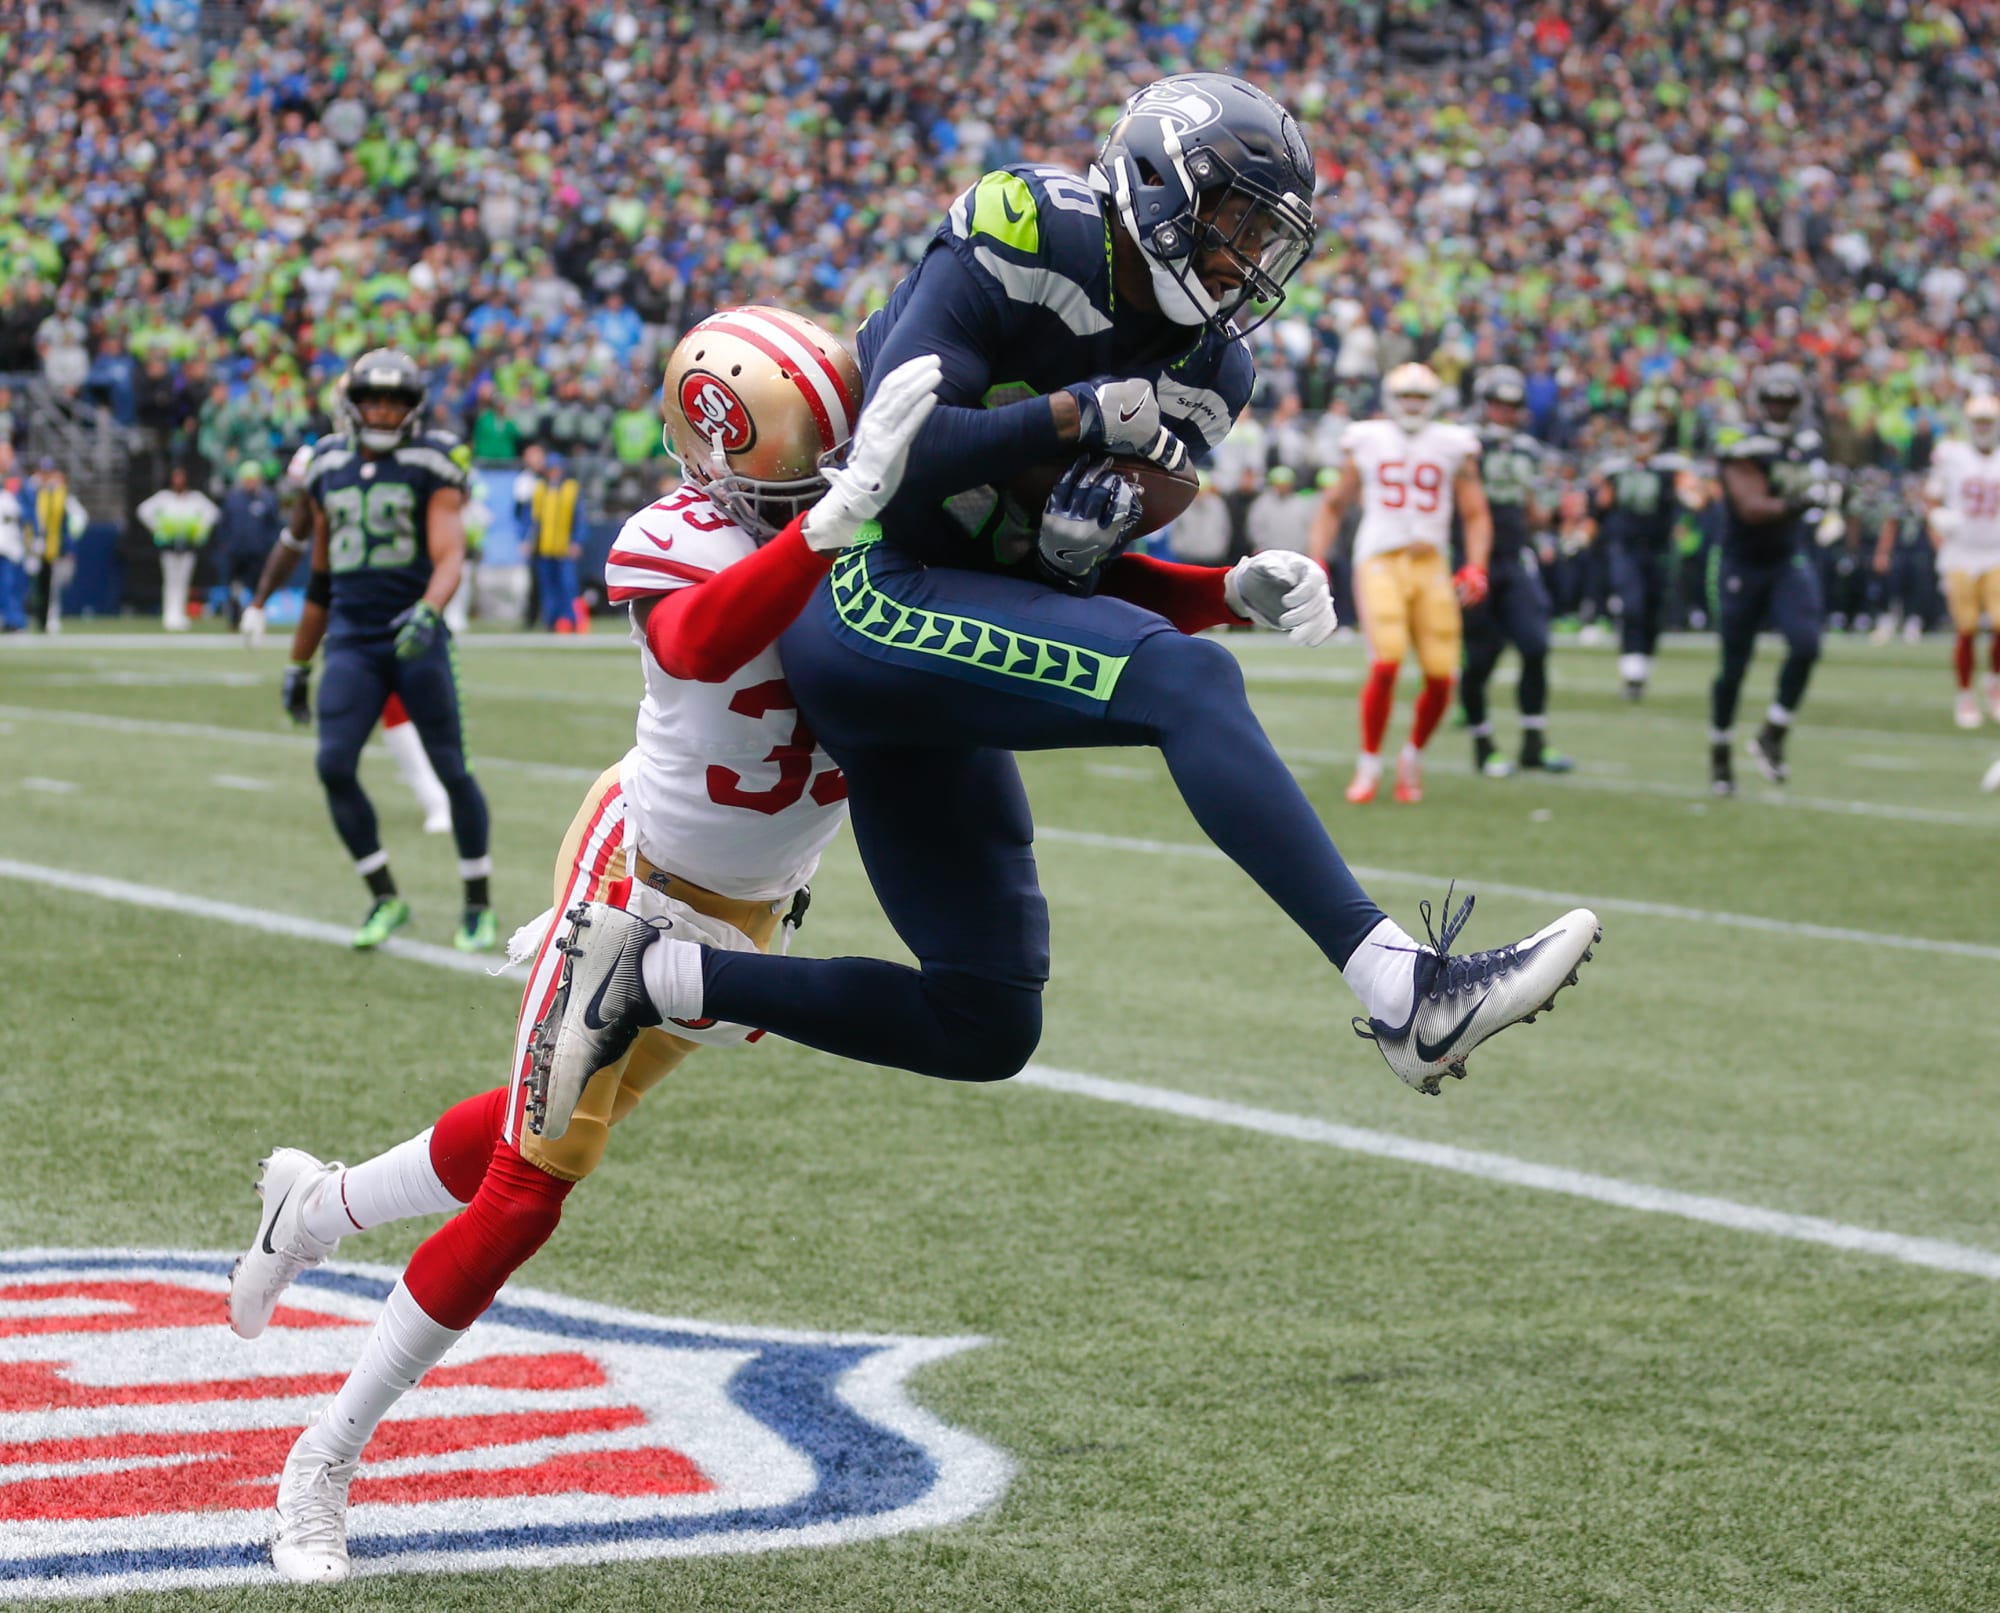 Seahawks vs. 49ers: Preview, score prediction for Week 12